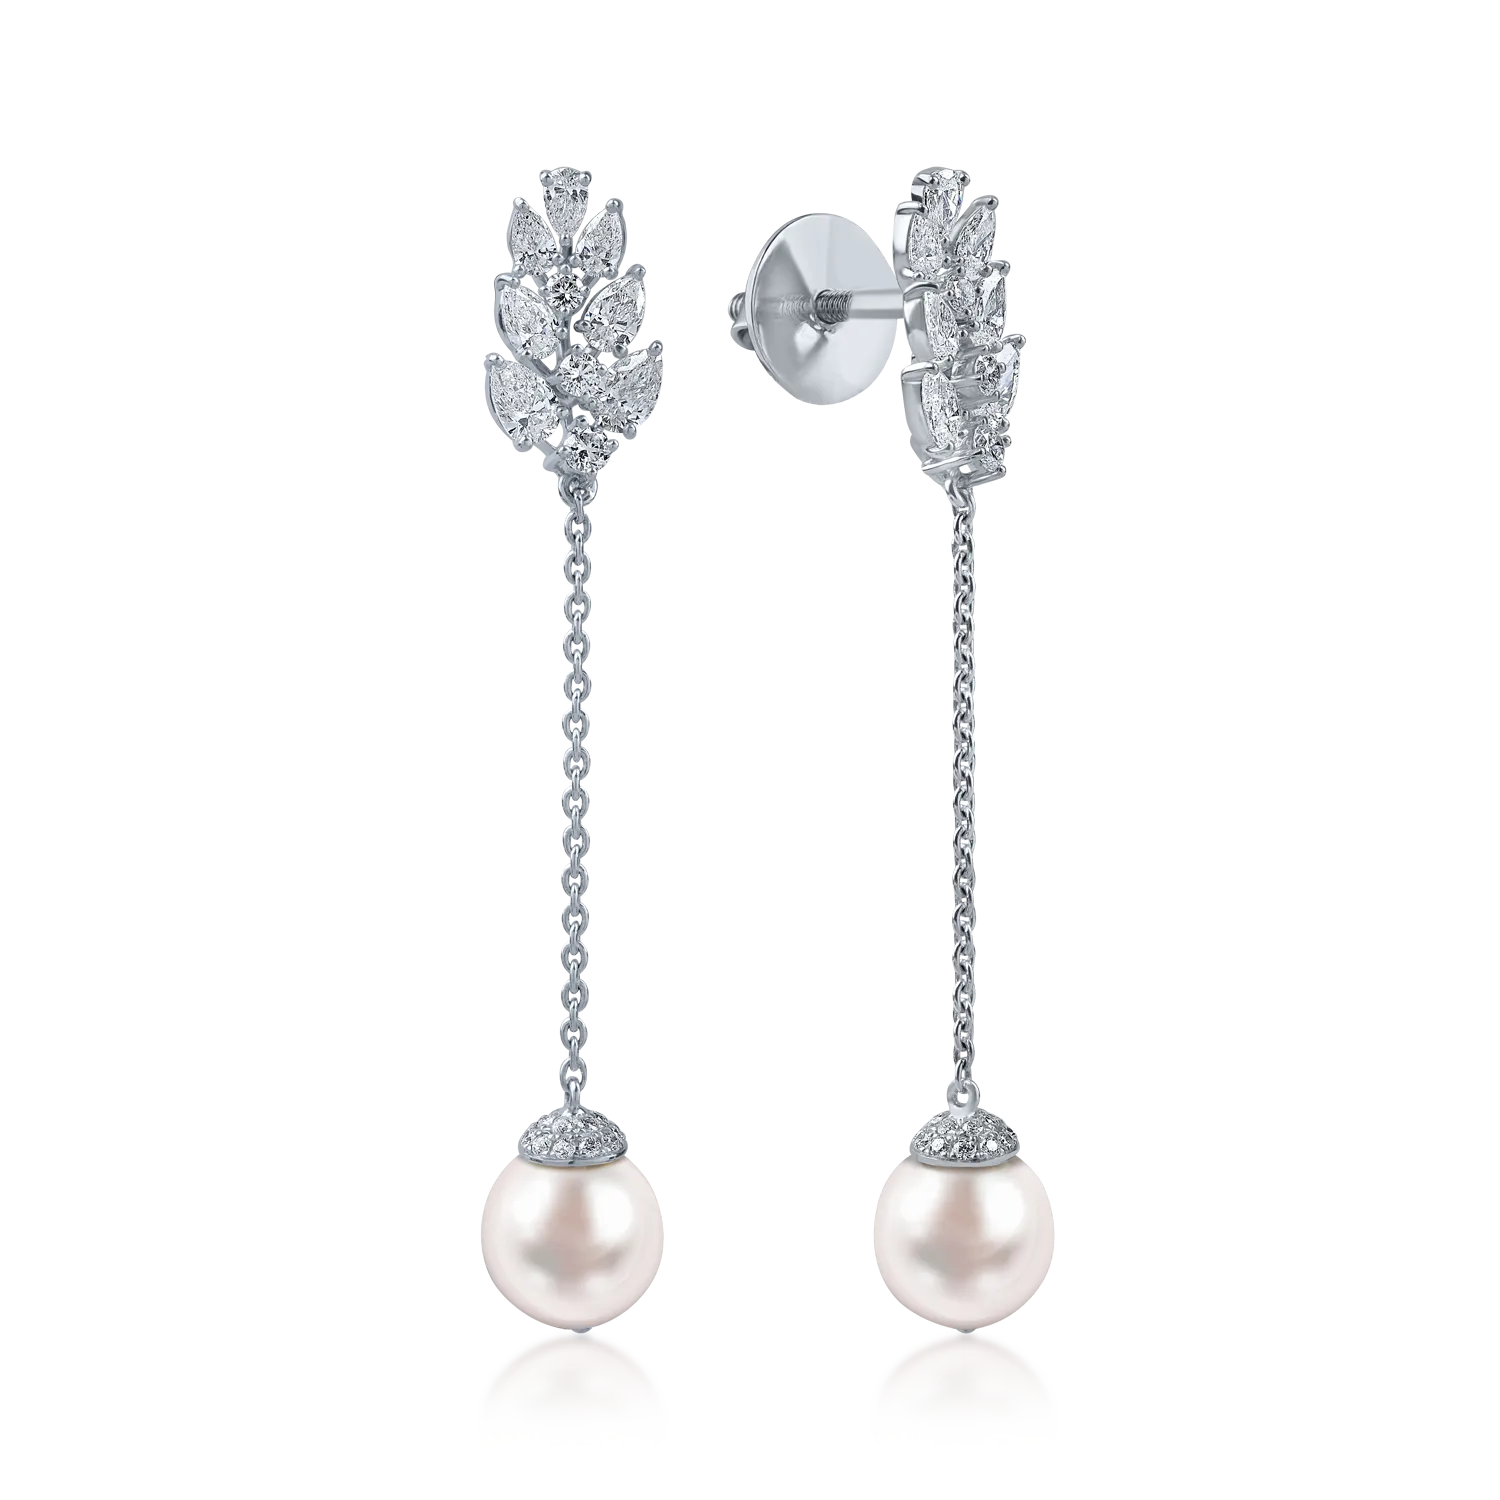 White gold long earrings with 10.8ct fresh water pearls and 1.88ct diamonds